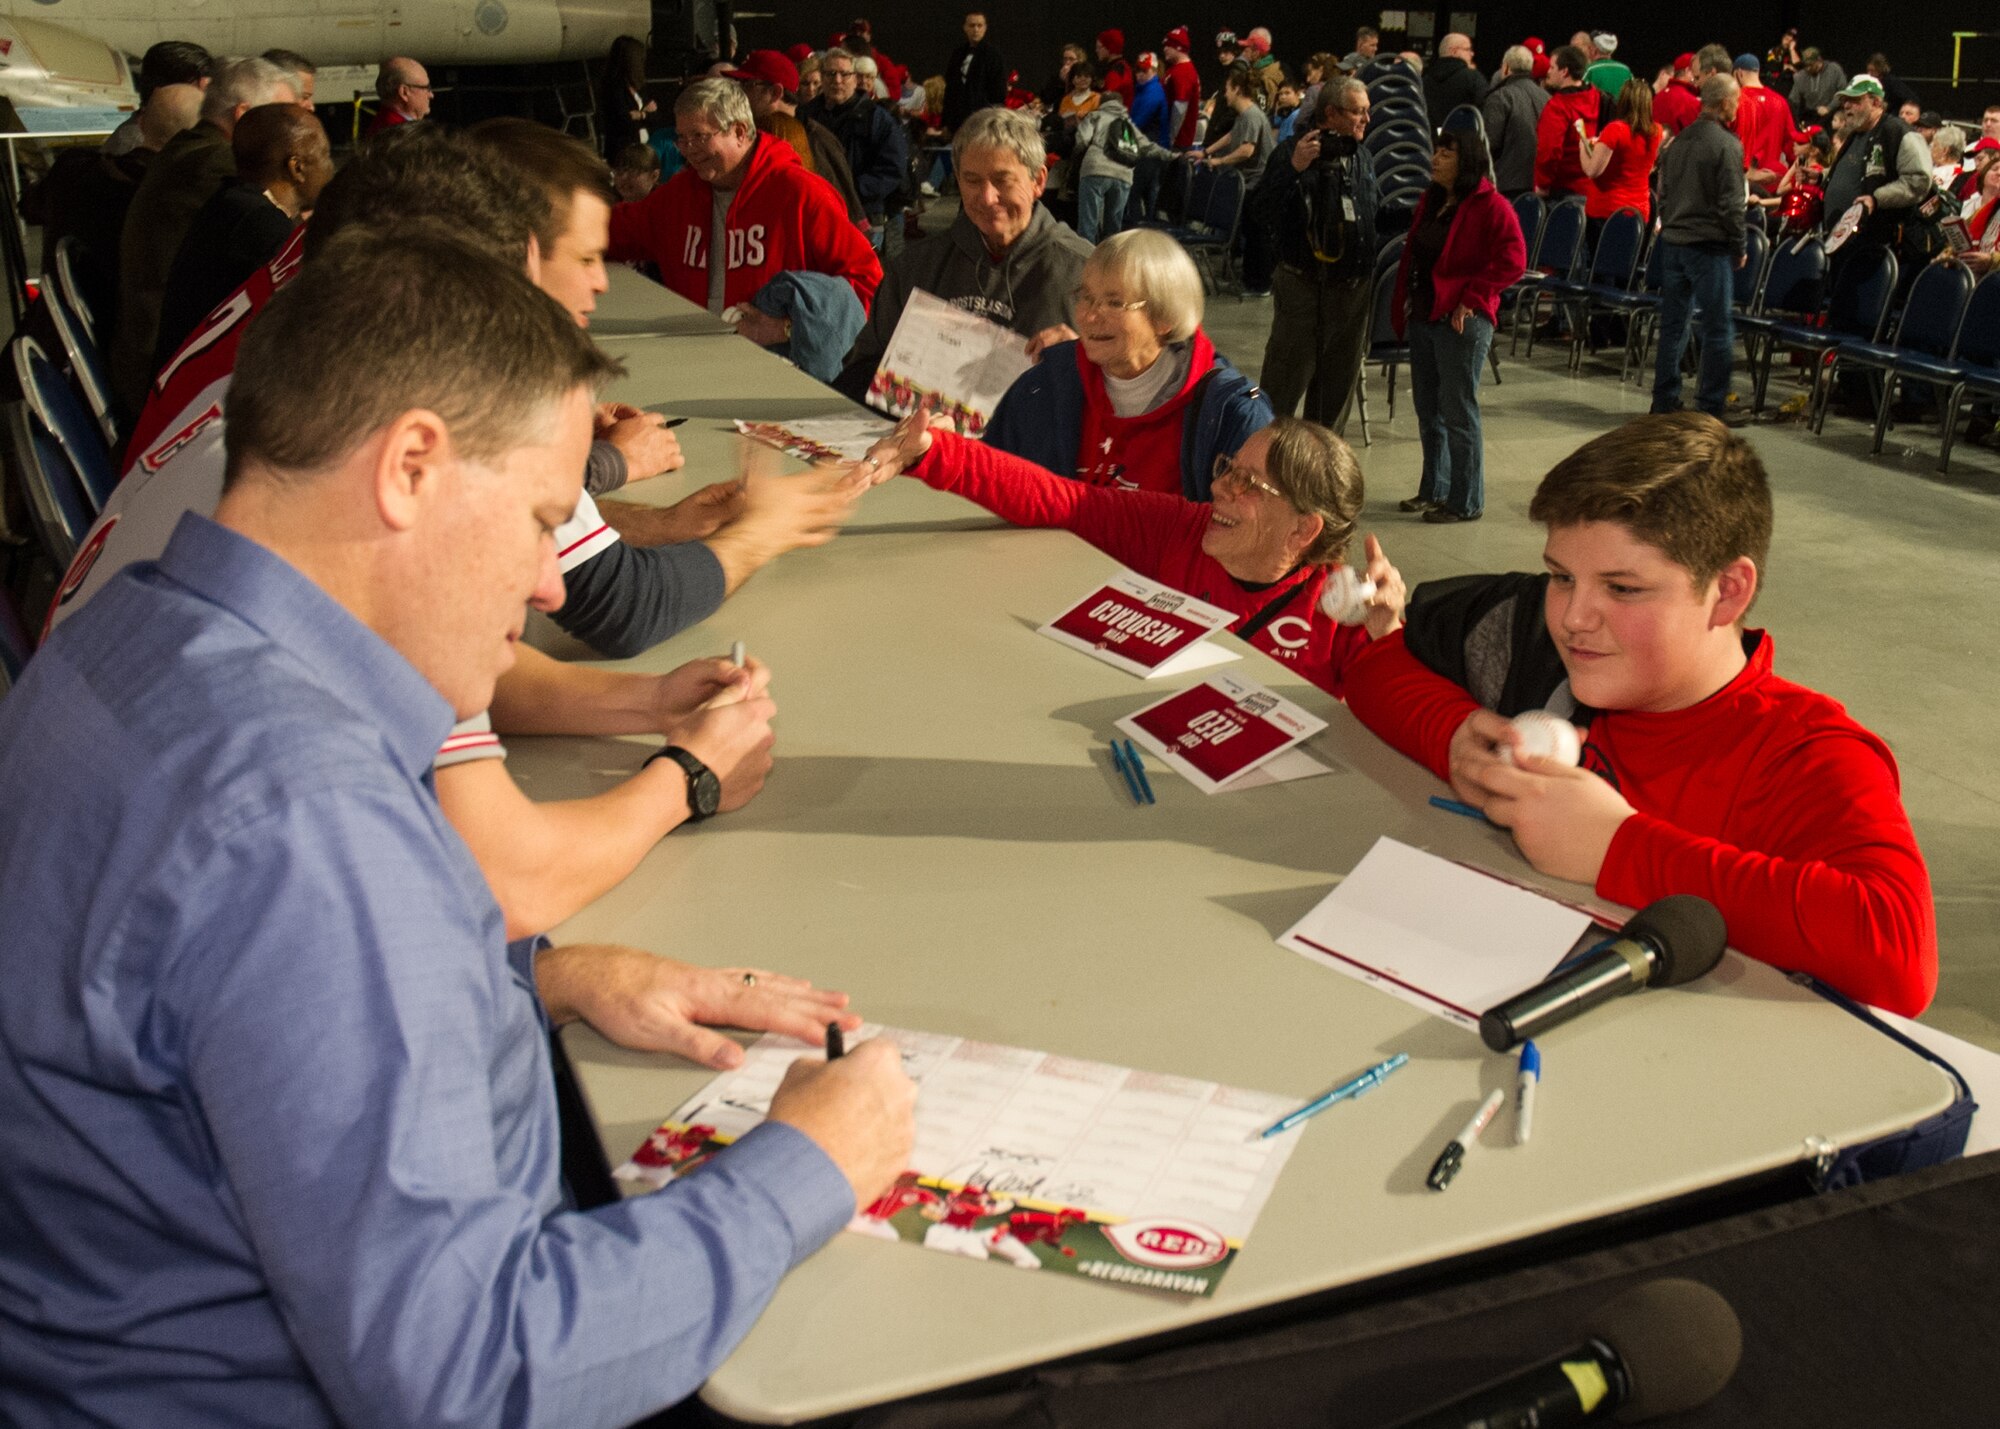 National Museum of the U.S. Air Force visitors had the opportunity to meet members of the Cincinnati Reds organization on January 30th, 2016. Here a fan receives and autograph from broadcaster Jim Day. Catcher Devin Mesoraco; president of baseball operations Walt Jocketty; minor league pitcher Cody Reed; former catcher Corky Miller; owner Bob Castellini; chief operating officer Phil Castellini; Baseball Hall of Famer Joe Morgan; broadcaster Thom Brennaman and mascot Mr. Redlegs were also at the museum stop. (U.S. Air Force photo)